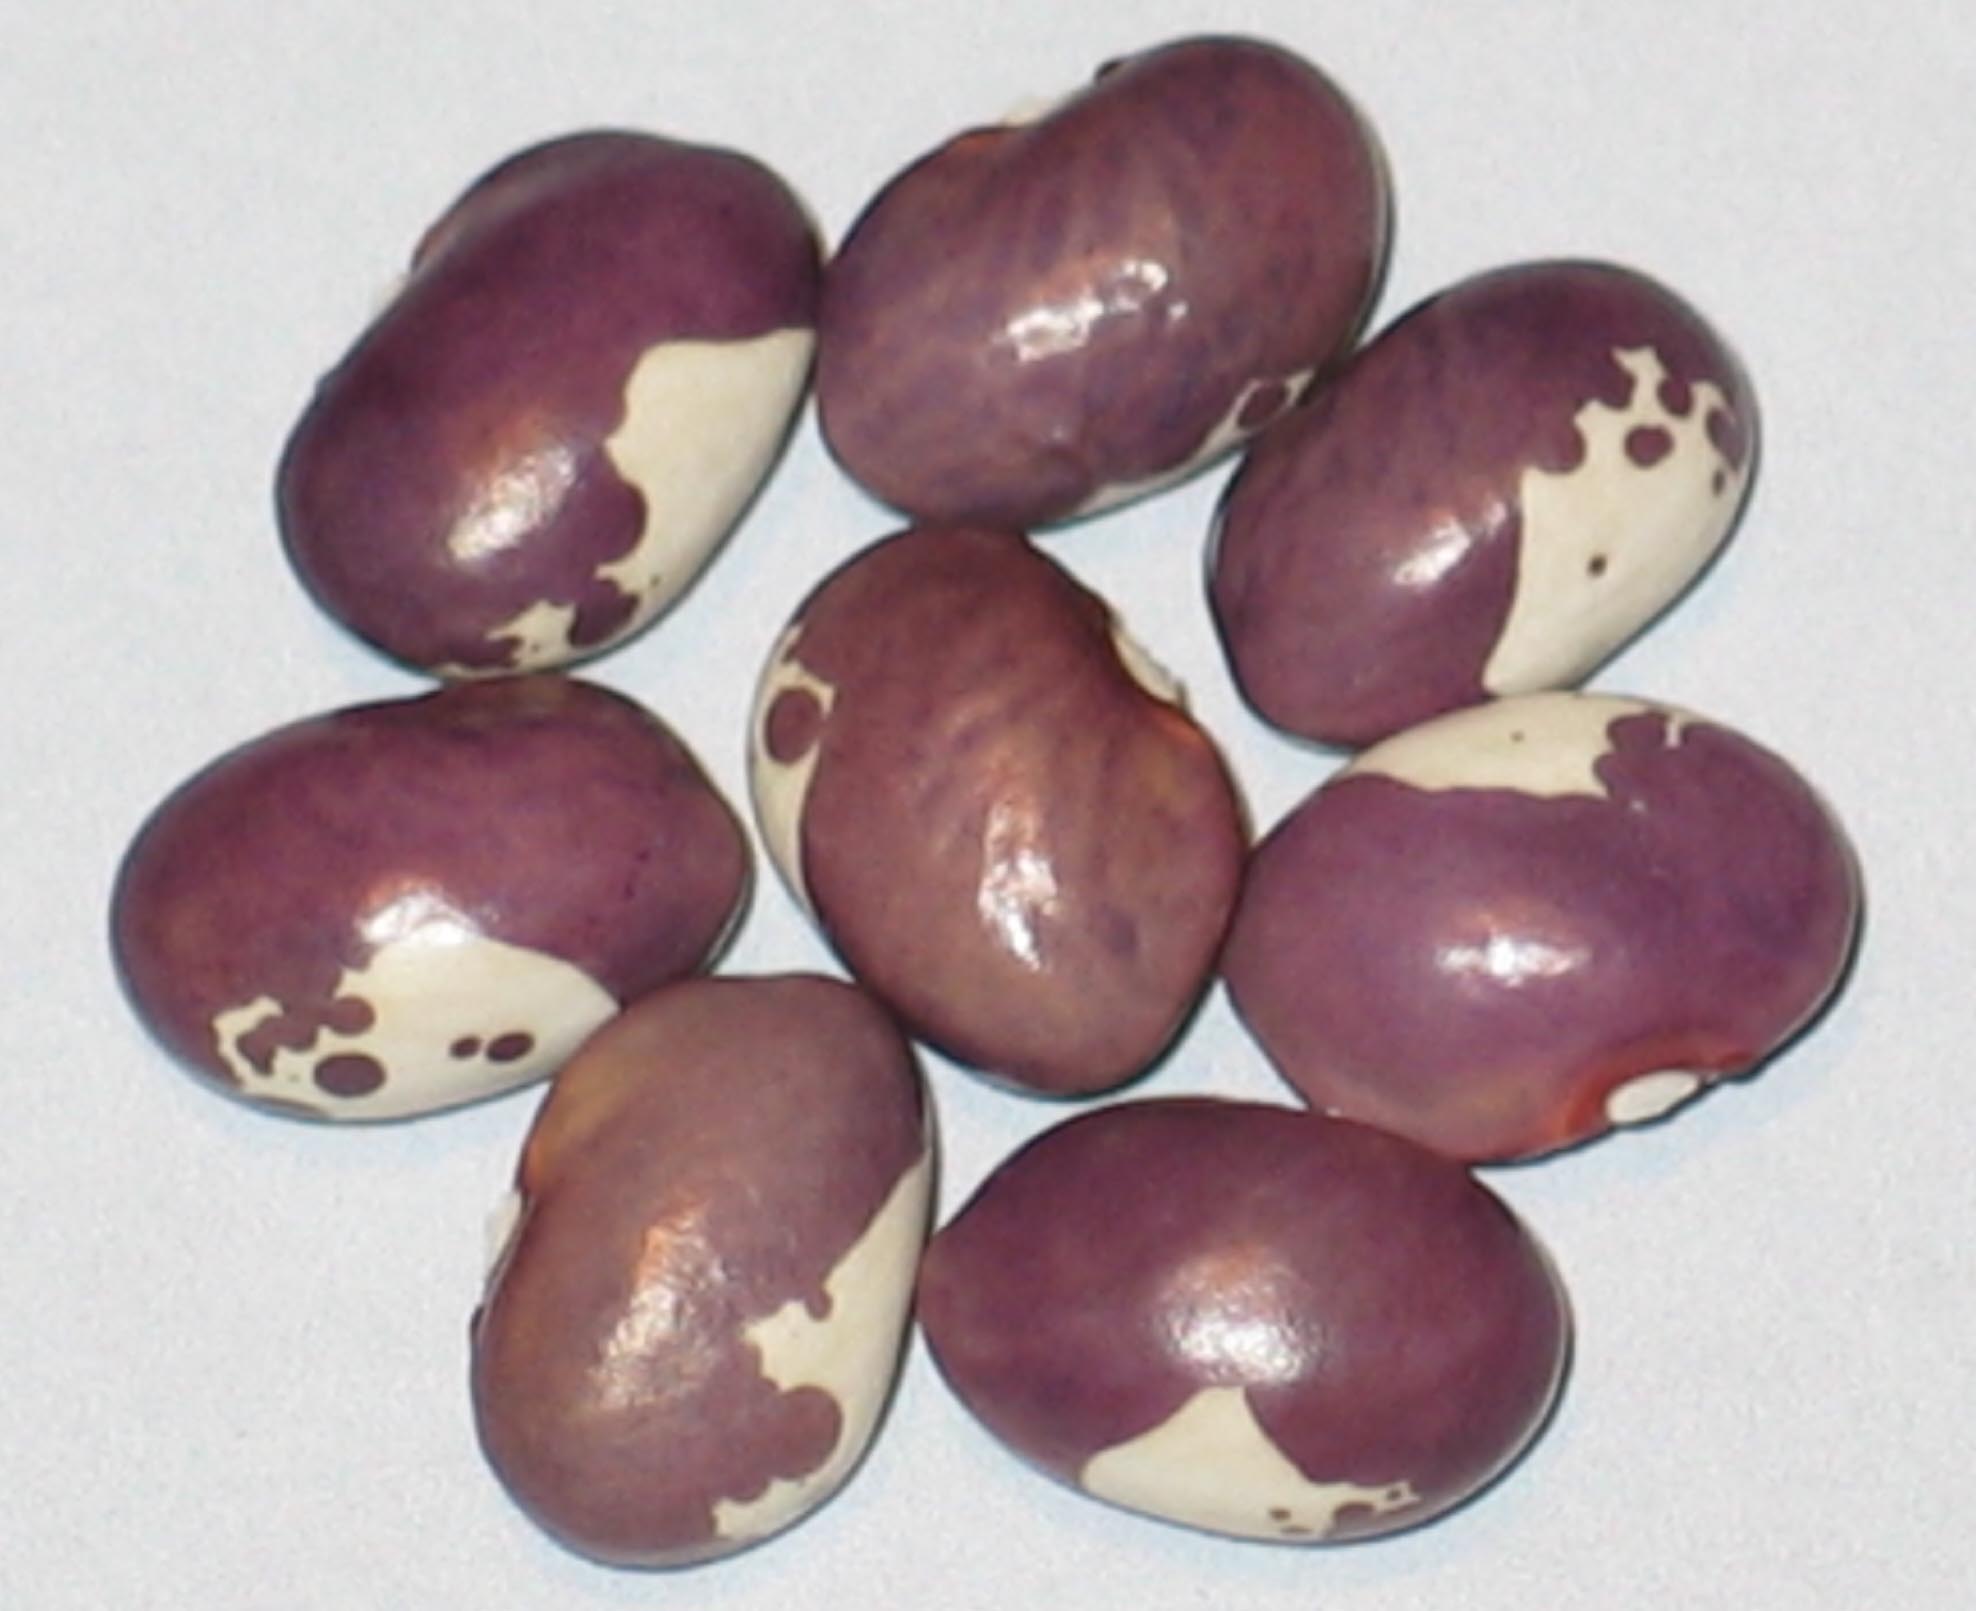 image of Lilaschecke beans